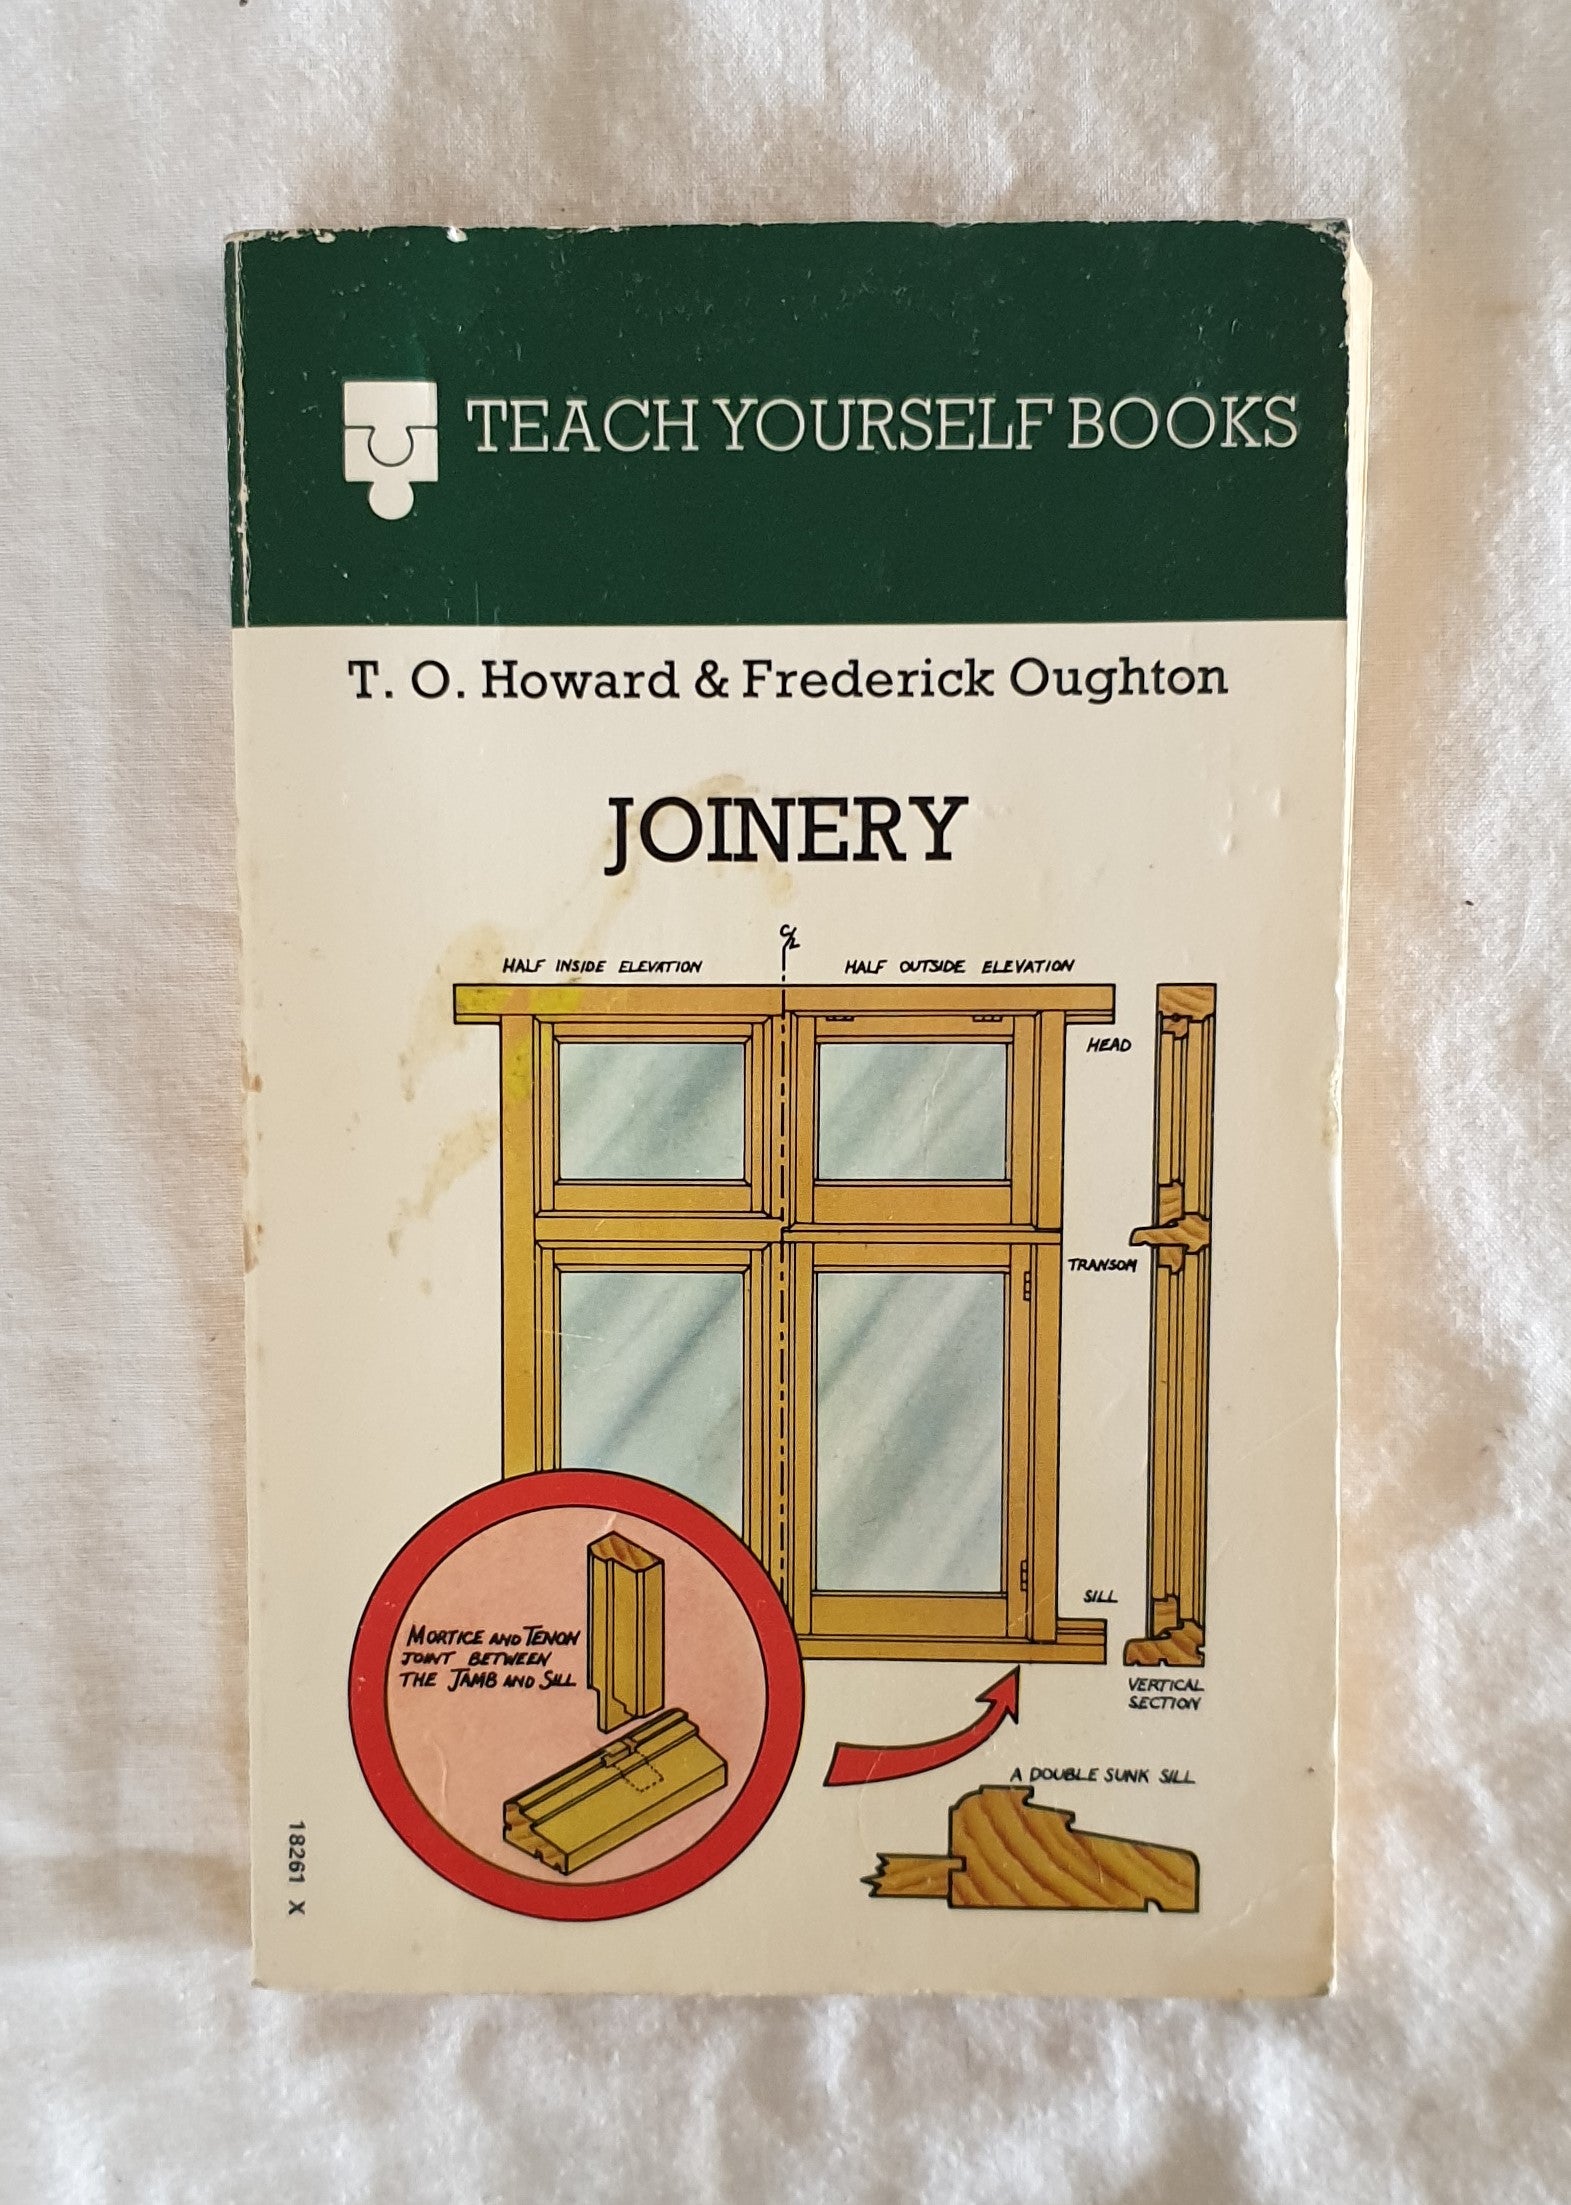 Joinery by T. O. Howard